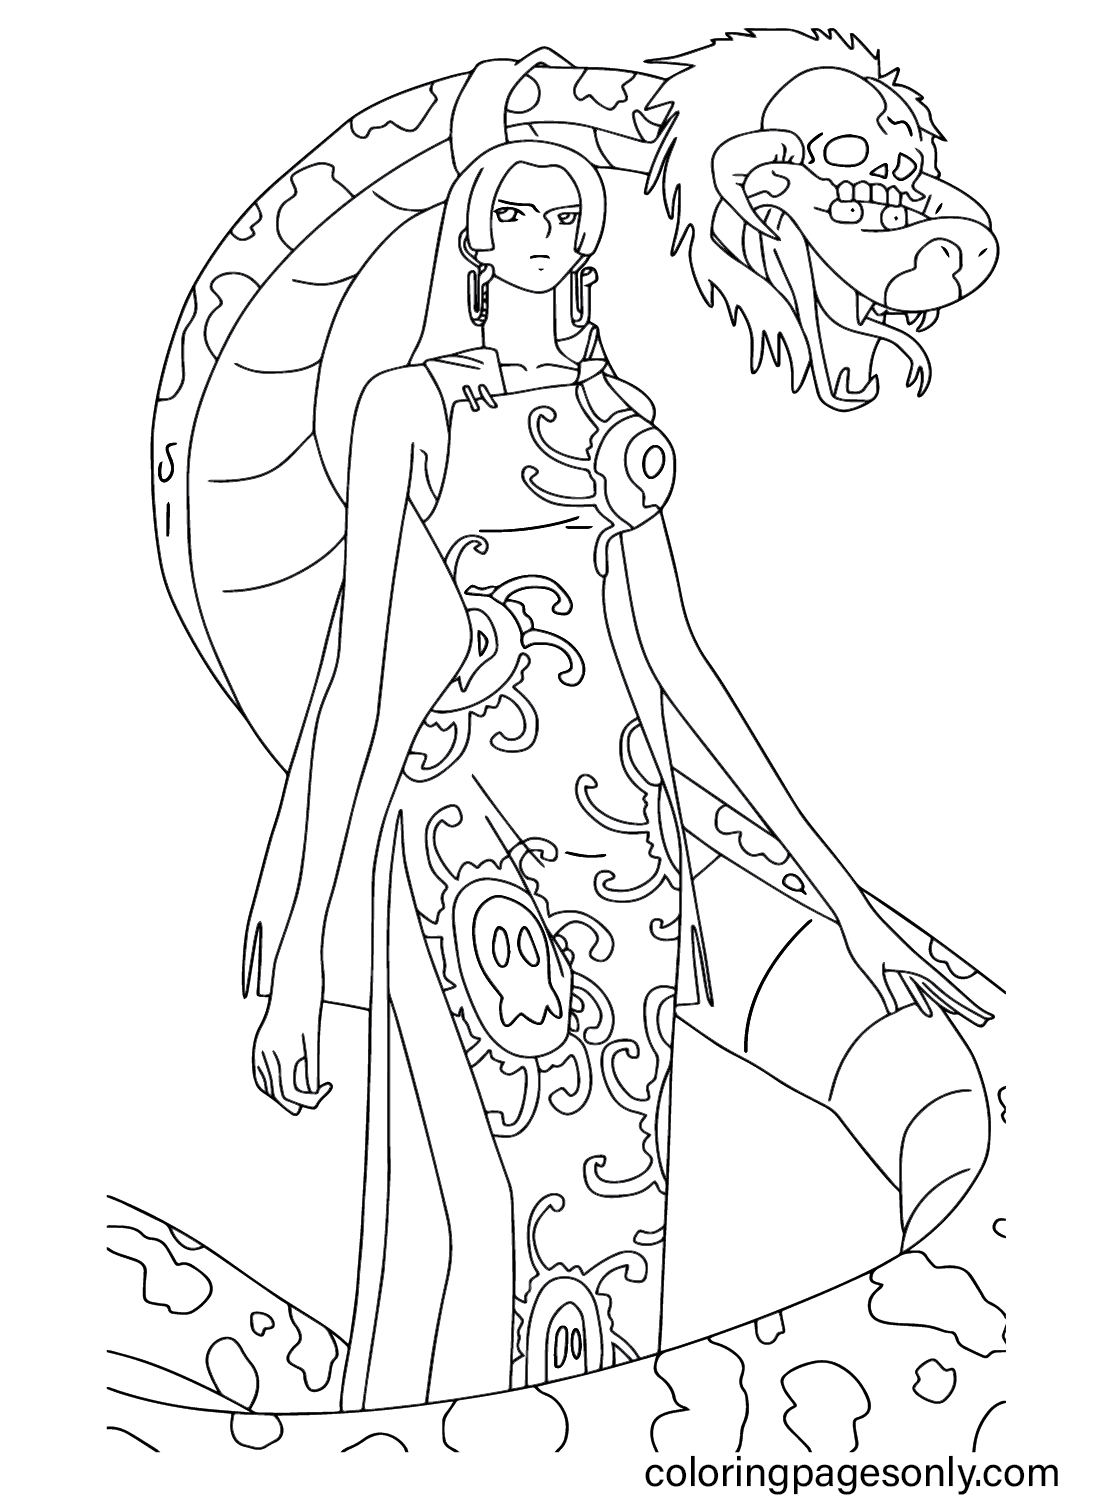 Boa Hancock Coloring Pages to Printable from Boa Hancock